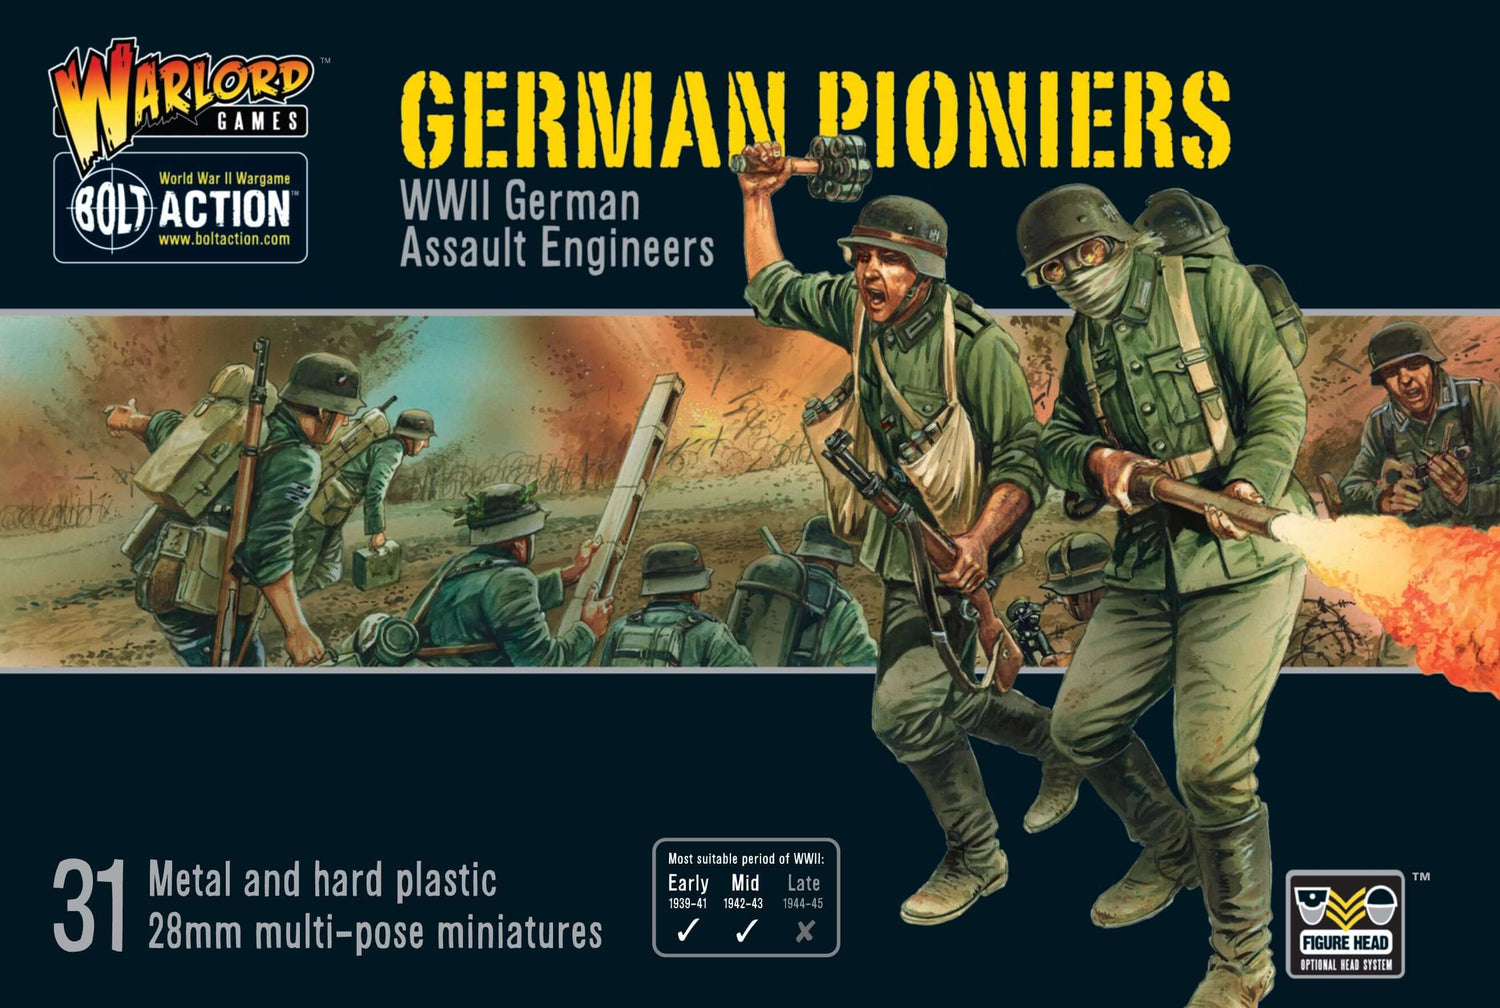 German Pioniers Bolt Action WARLORD